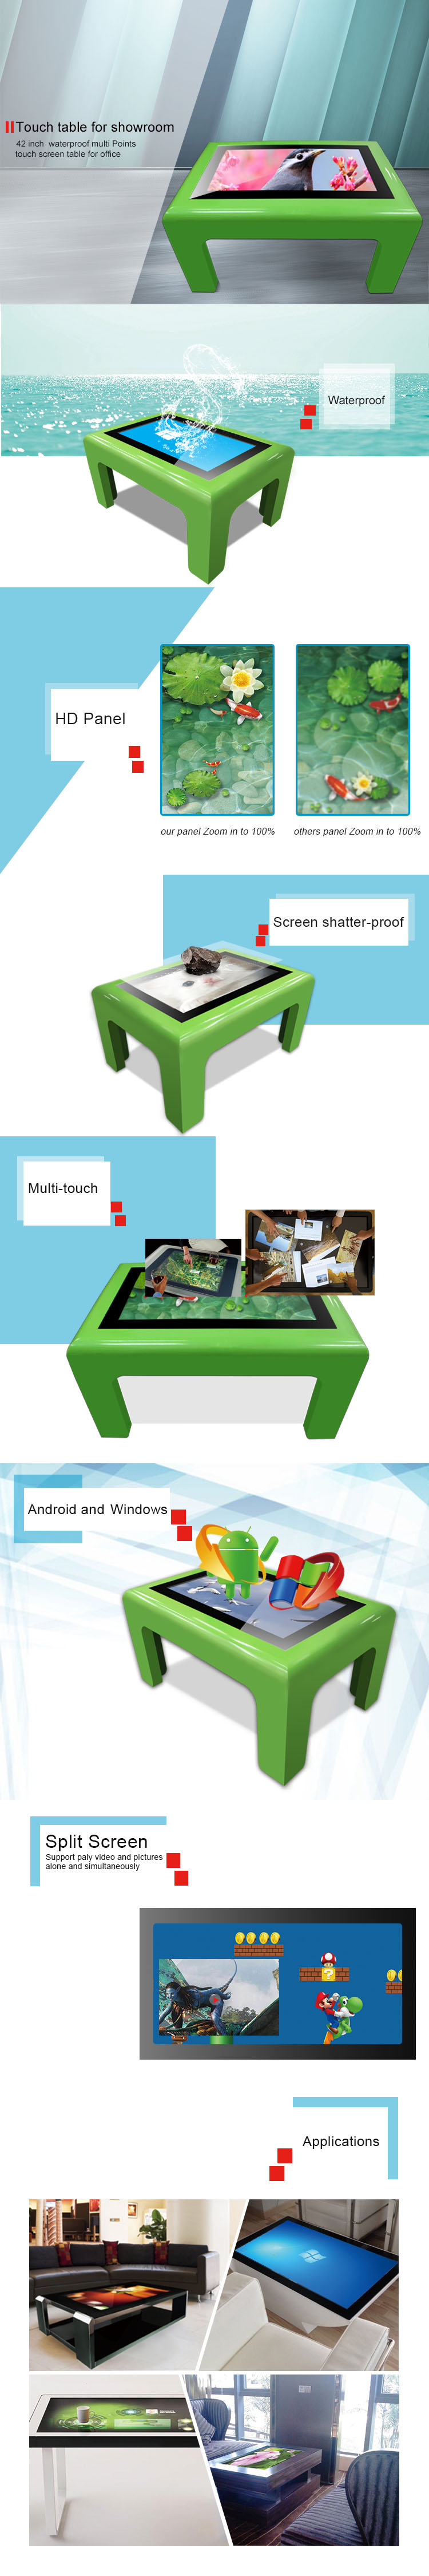 Model Number: MWE953 Multimedia interactive Touch screen Table For Early Education